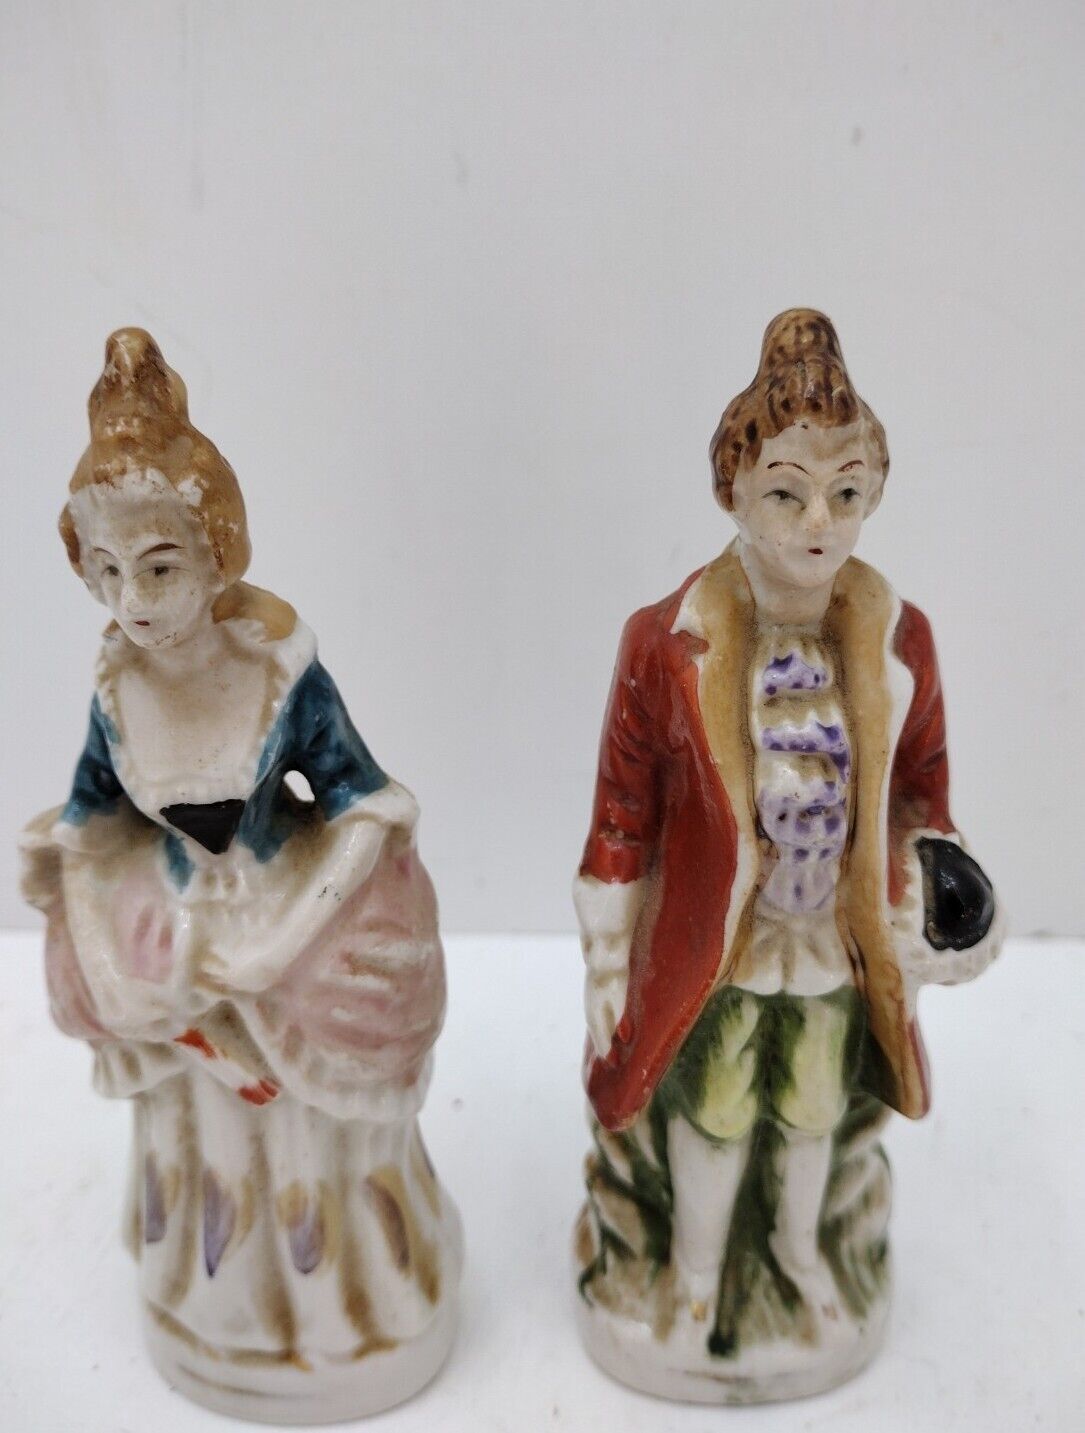 Vintage porcelain figurines of Colonial Couple Man and Woman , Estate Sale Find.